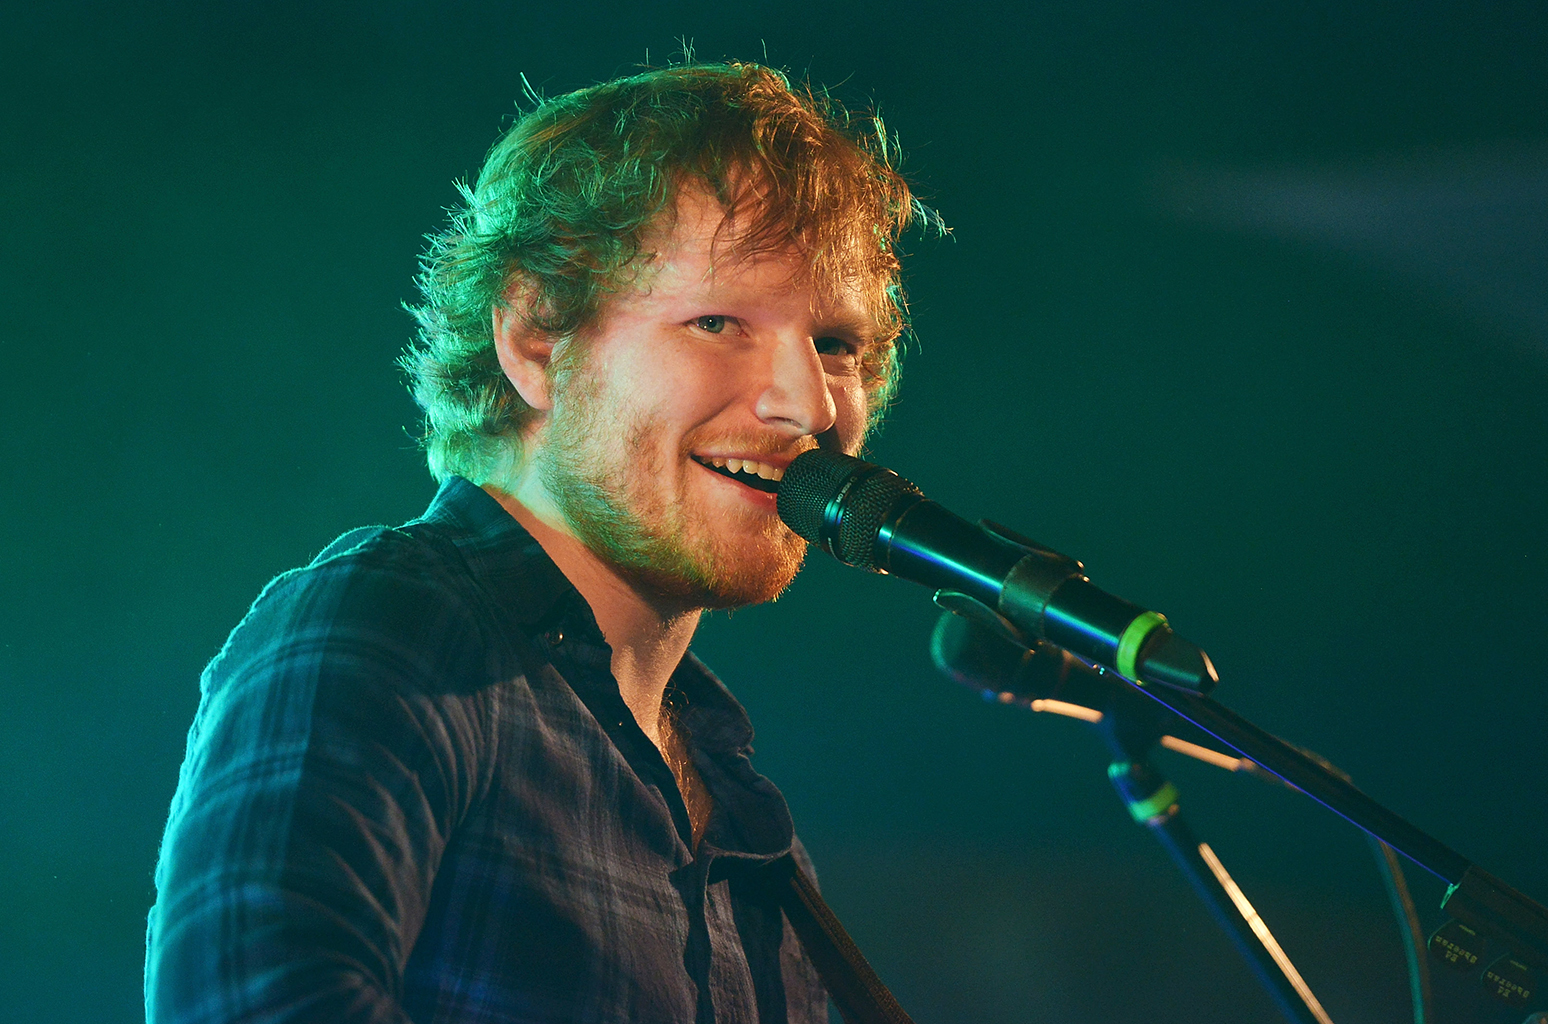 Ed Sheeran Emerges As Most Streamed Artist Of 2017 Globally